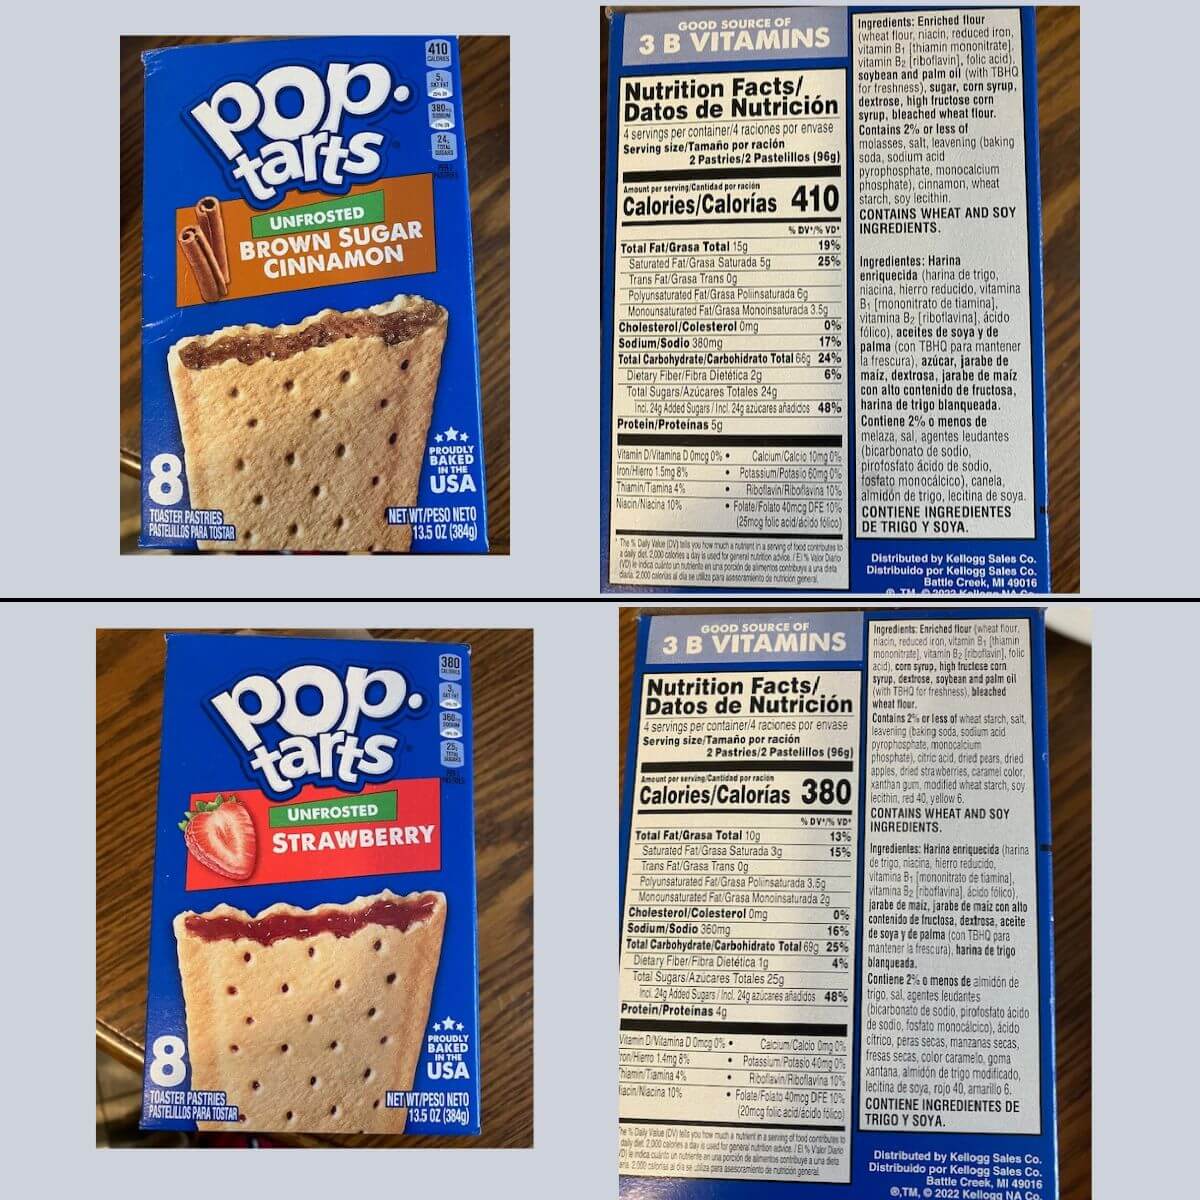 picture showing boxes of pop tarts unfrosted brown sugar cinnamon and strawberry flavored nutrition facts.